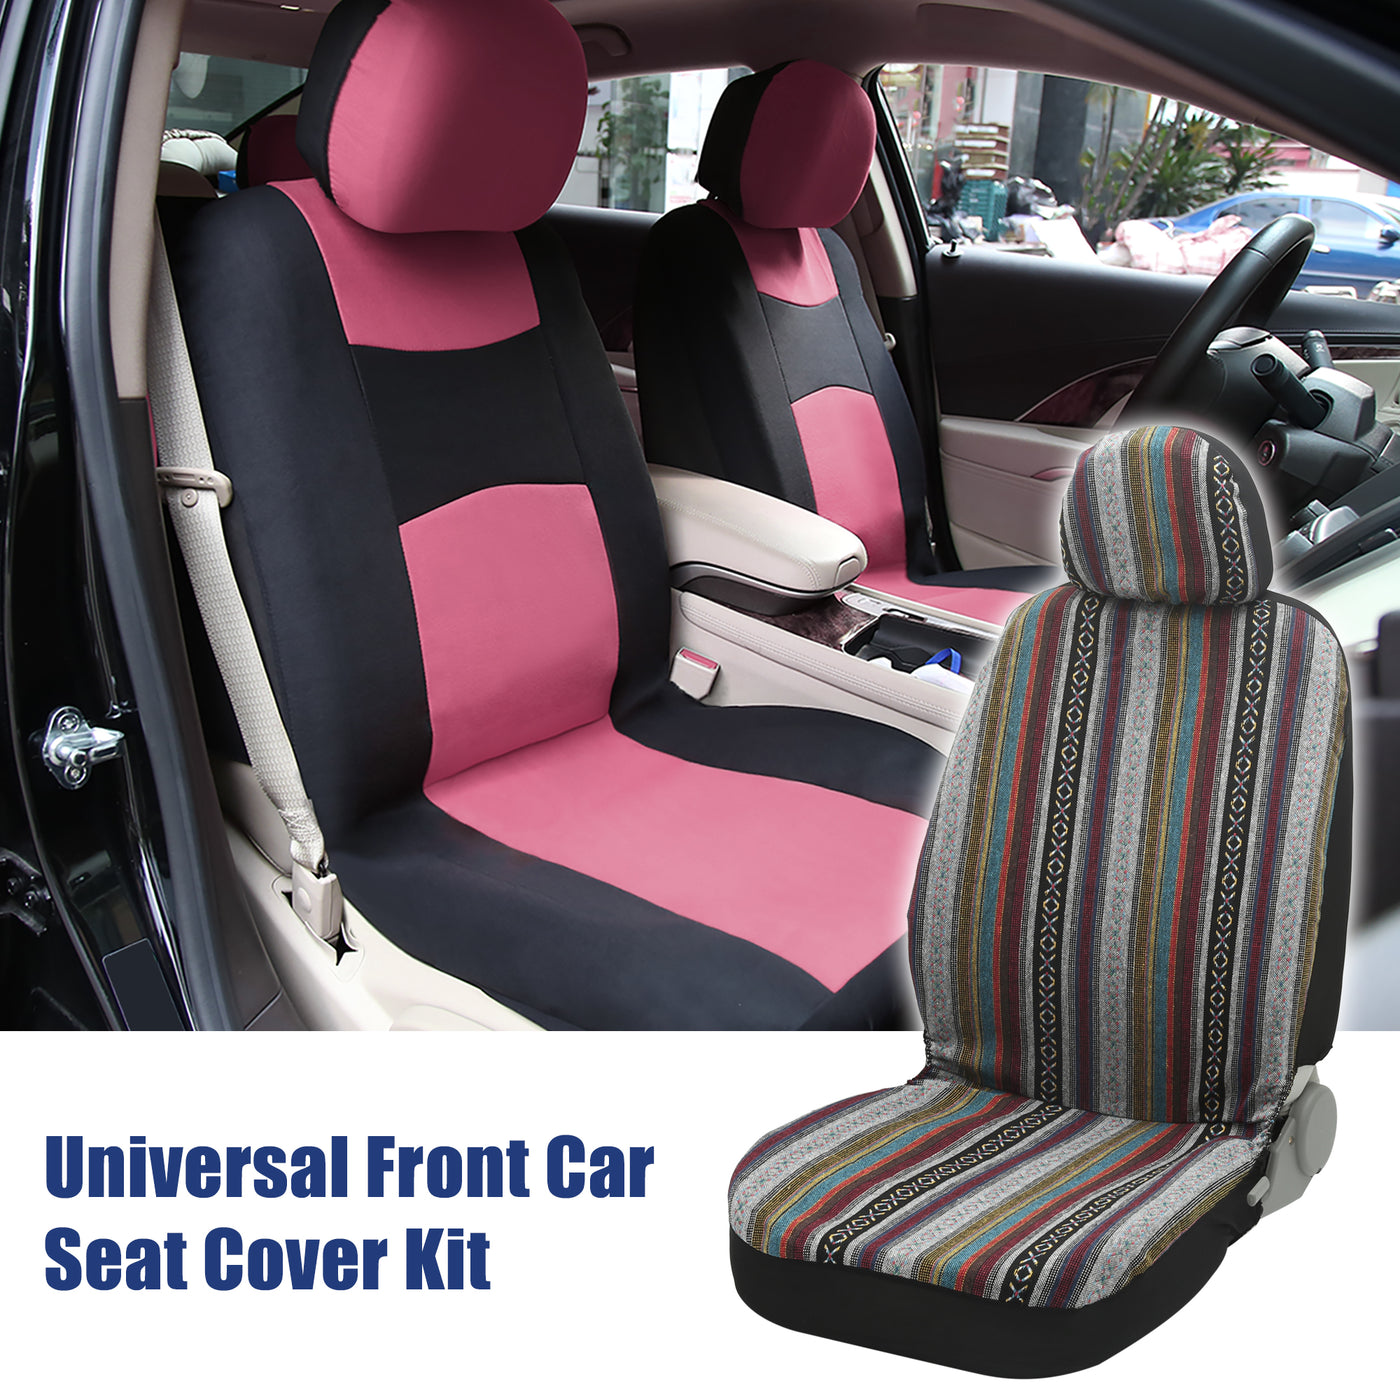 X AUTOHAUX Baja Saddle Blanket Car Seat Covers Front Set with Headrest Cover Washable Breathable Striped Woven Cloth Seat Covers for Most Cars SUV Sedan Truck Multicolor